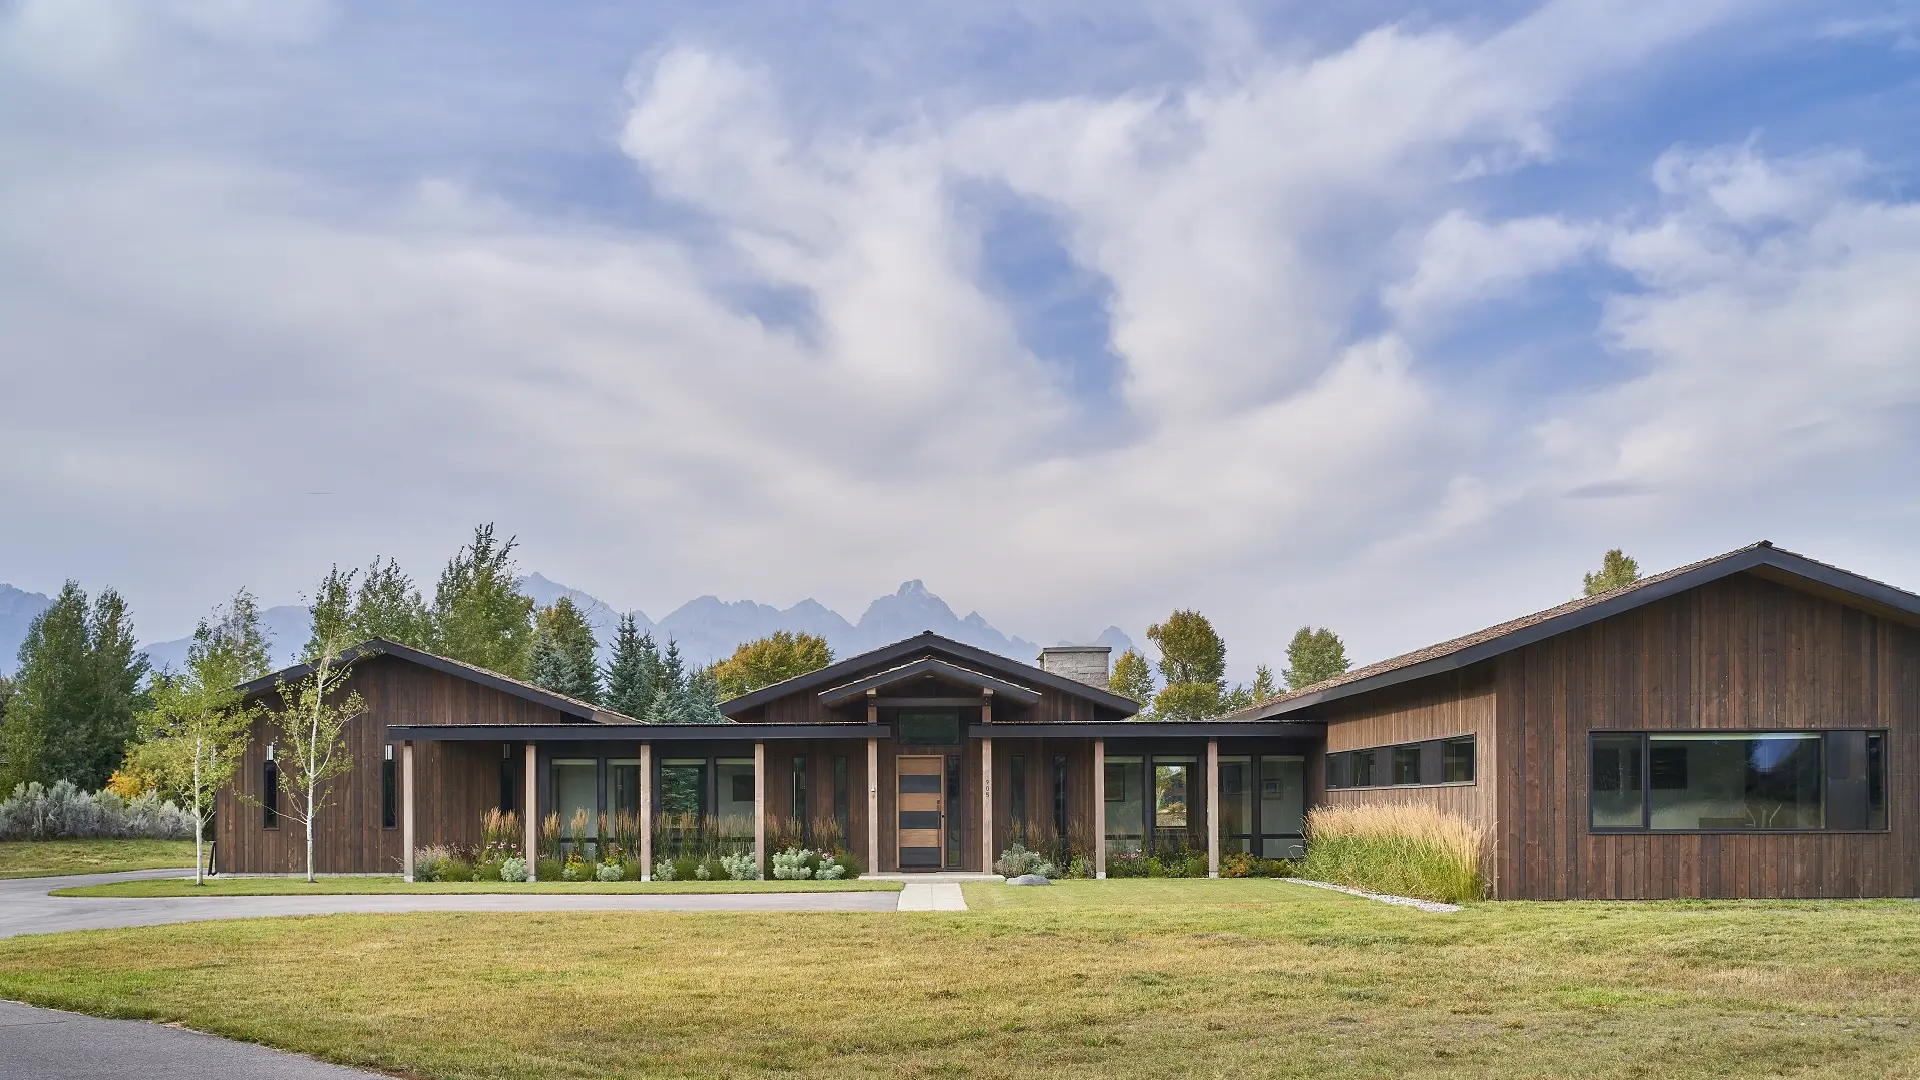 Full exterior view of the front of G&T House, a custom home designed and built by Farmer Payne Architects.